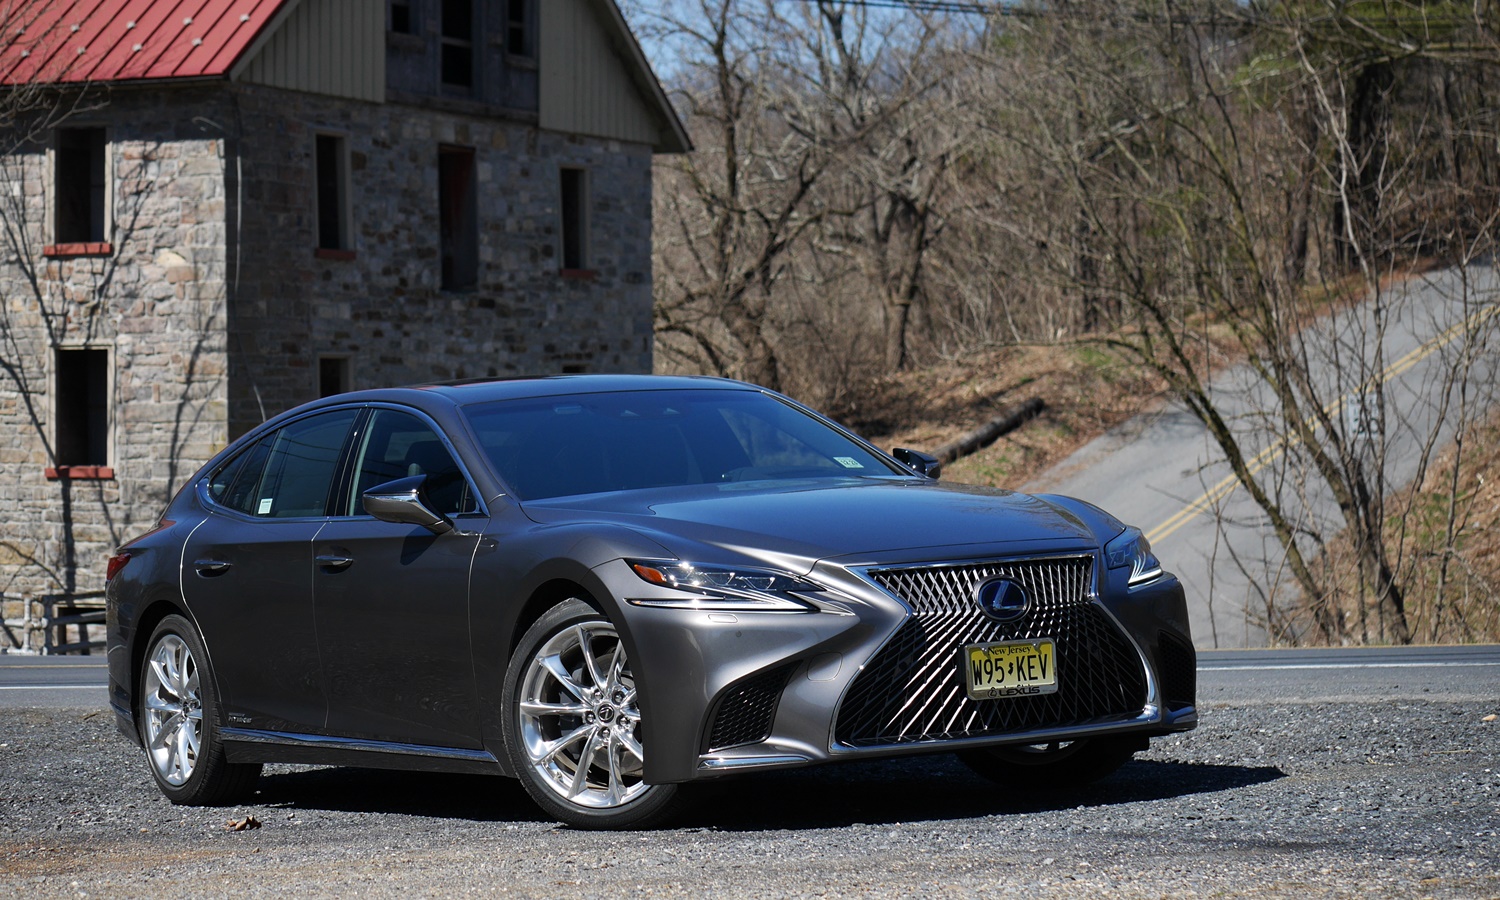 2019 Lexus LS Pros and Cons at TrueDelta: 2019 Lexus LS Review by Michael  Karesh